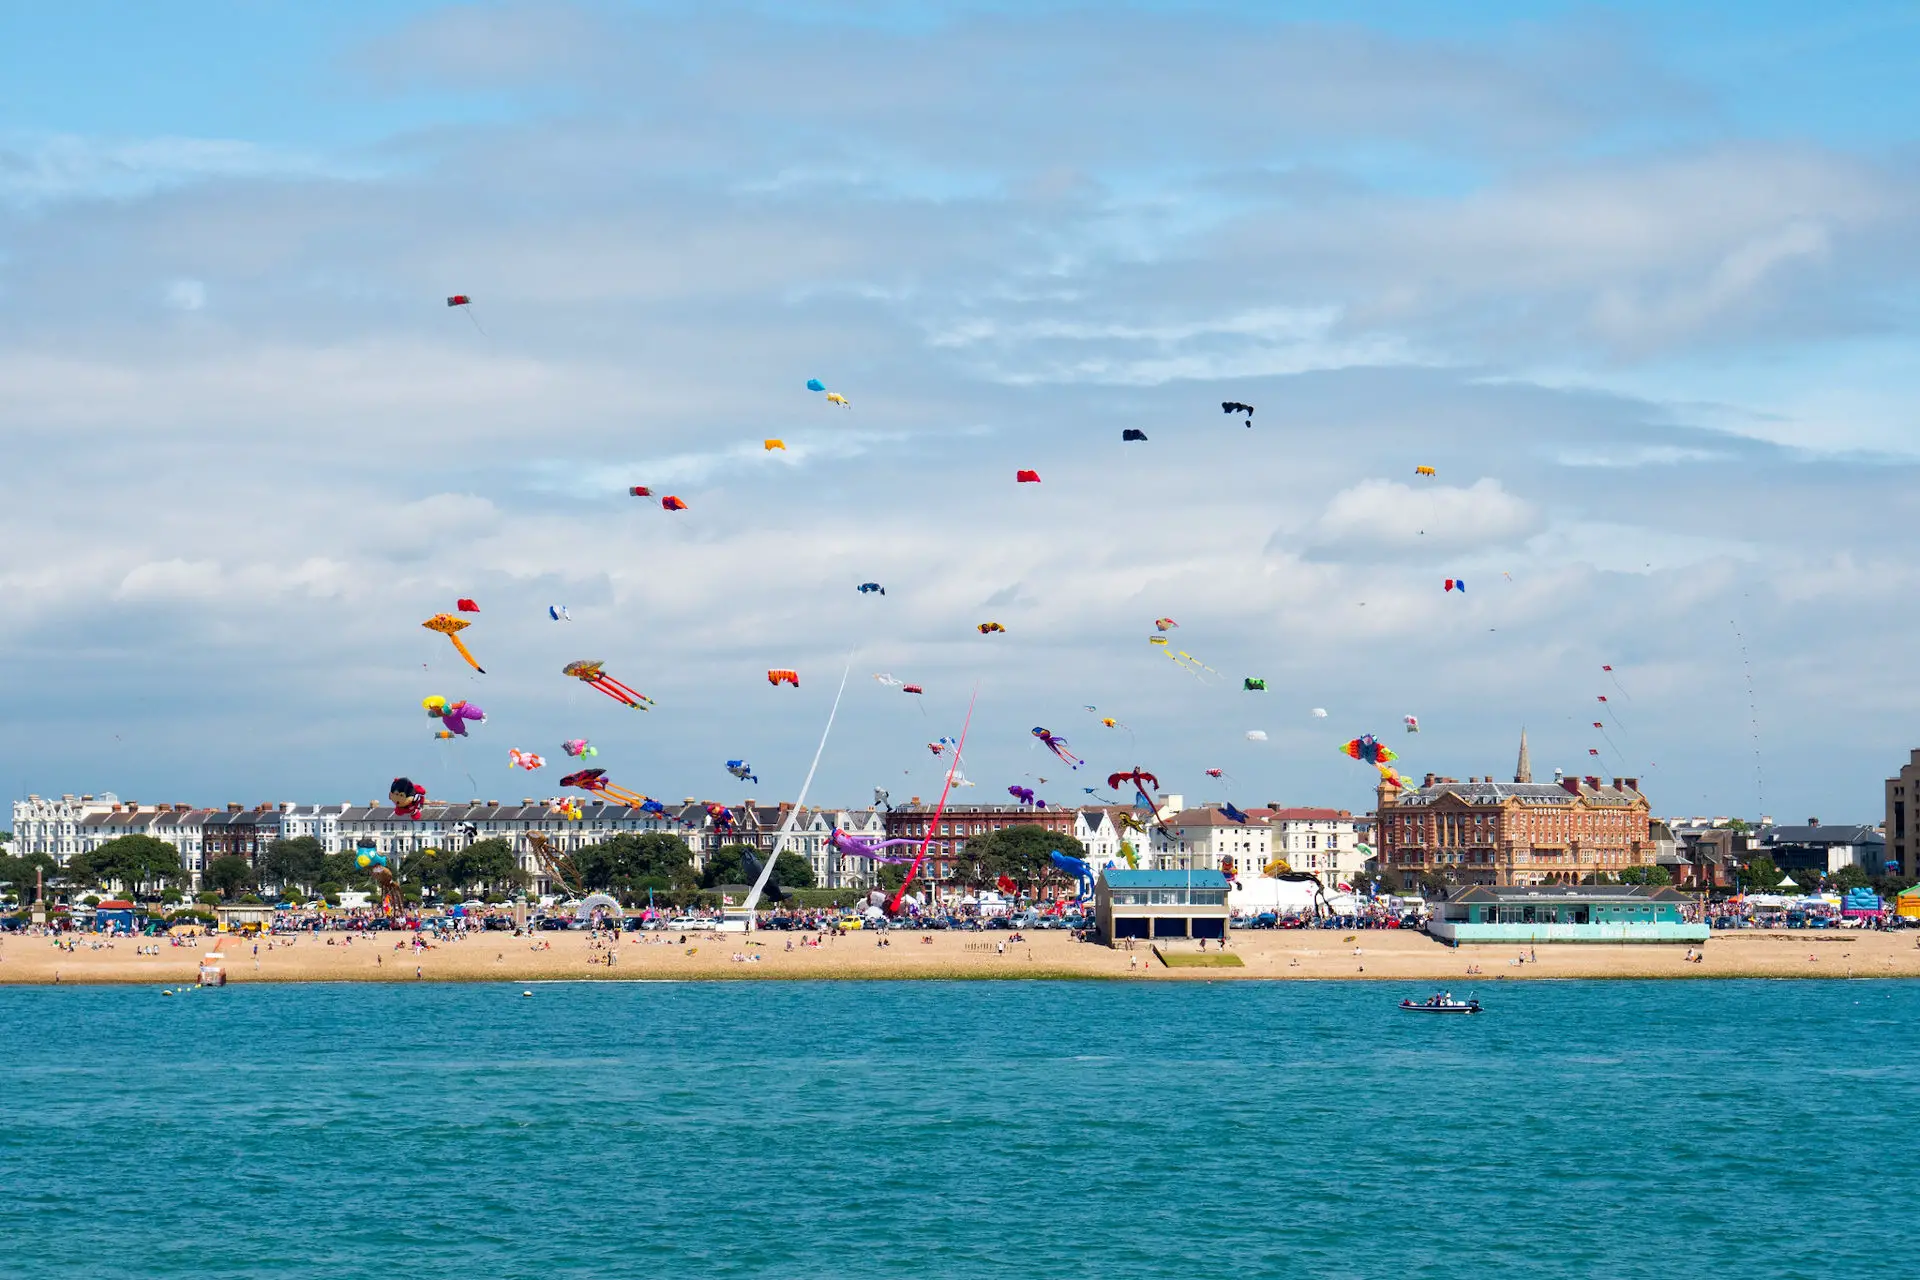 Southsea coastline with kites flying from the beach